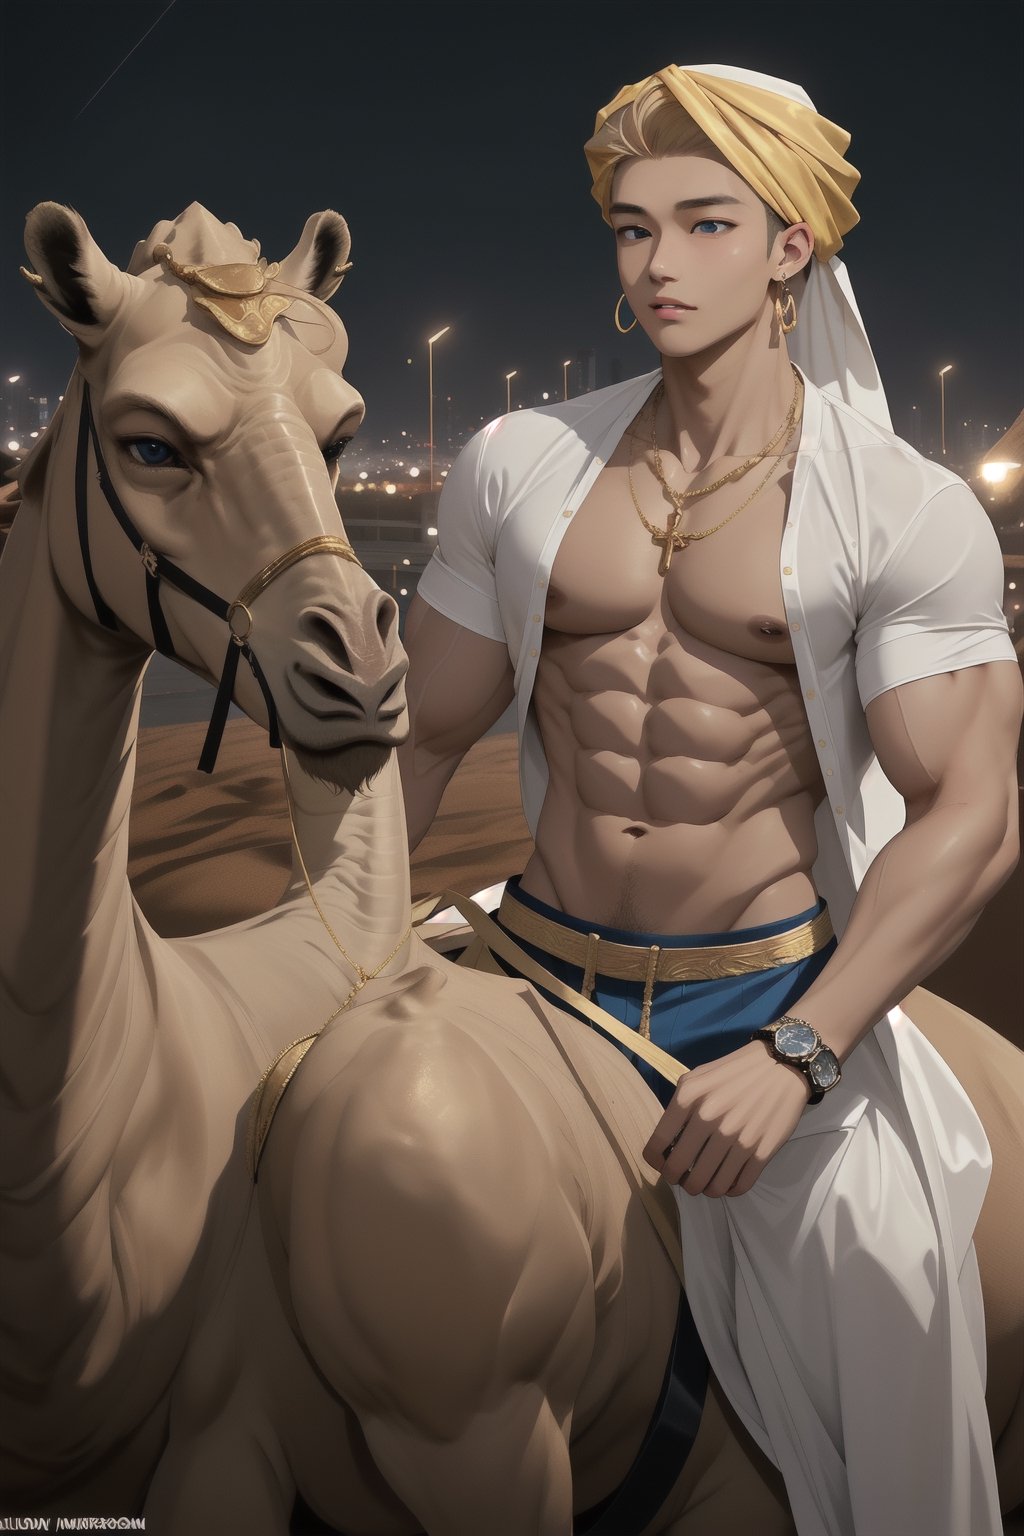 intricate detail, 18 year old, young handsome asian male wearing gorgeous underware with jewels,  kpop,ikemen, blue eyes, handsome, earrings, gold necklace, luxuary golden omega watch,  blond hair, big muscle, physique, fitness model, wealthy, billionair,  shirtless, turban, riding a camel,   dubai night background